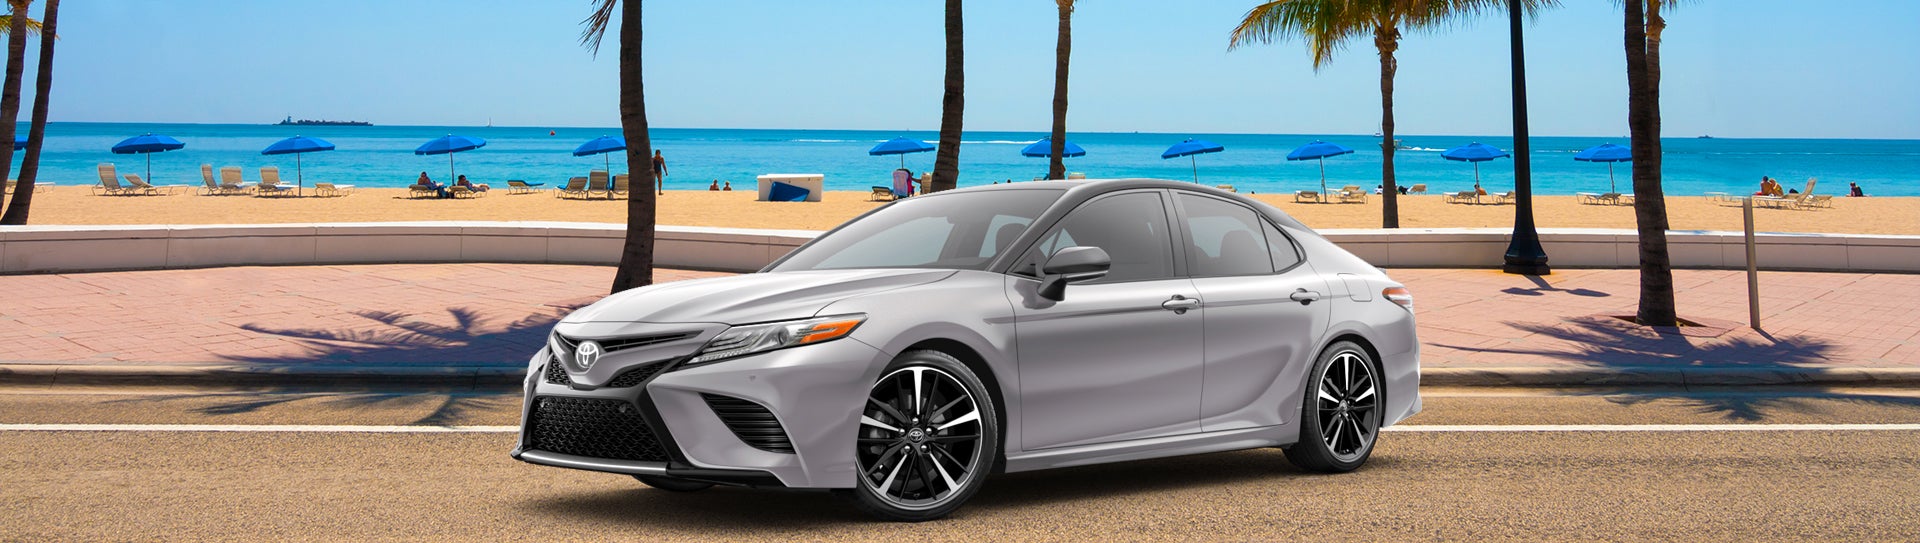 2018 Toyota Camry Comparisons